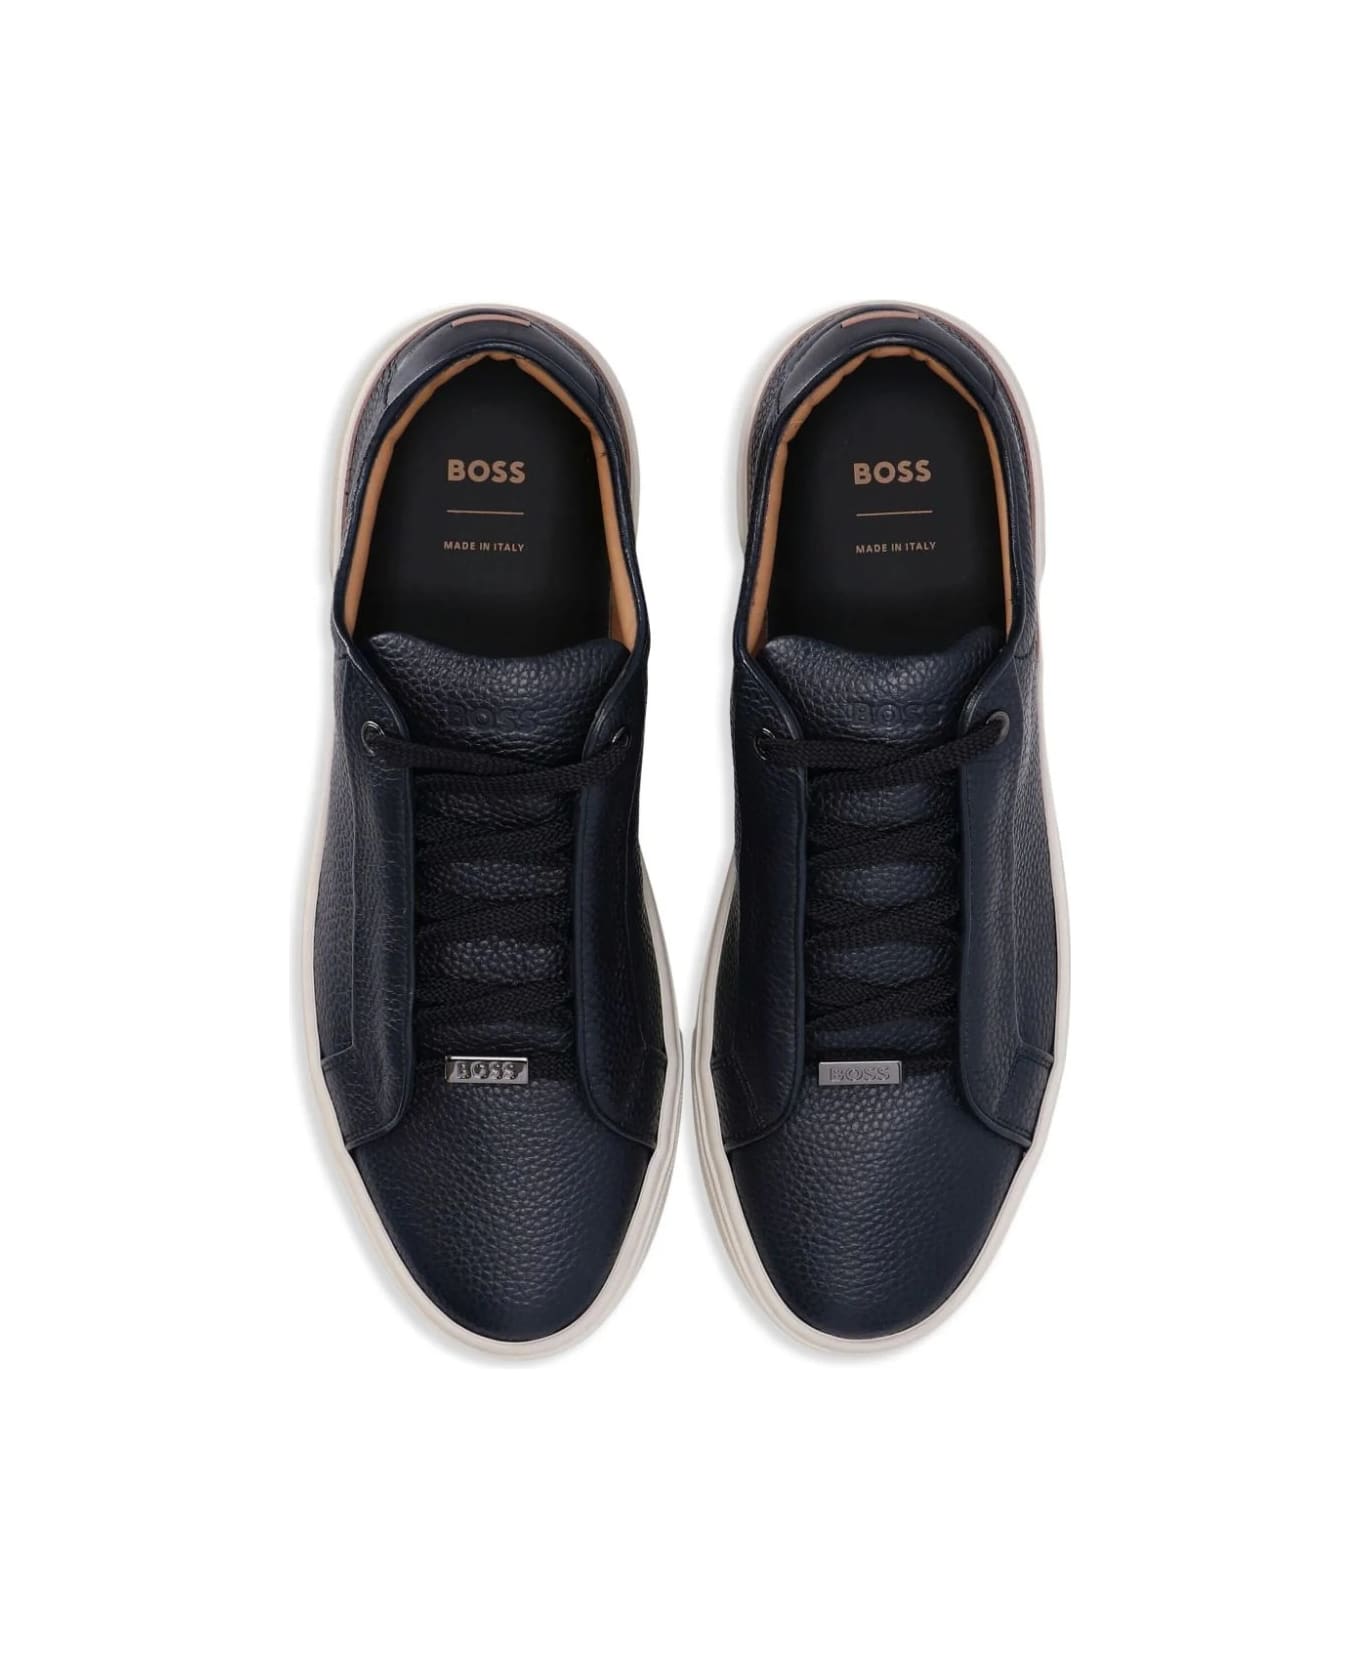 Hugo Boss Blue Grained Leather Sneakers With Logo Tag On Laces - Blue